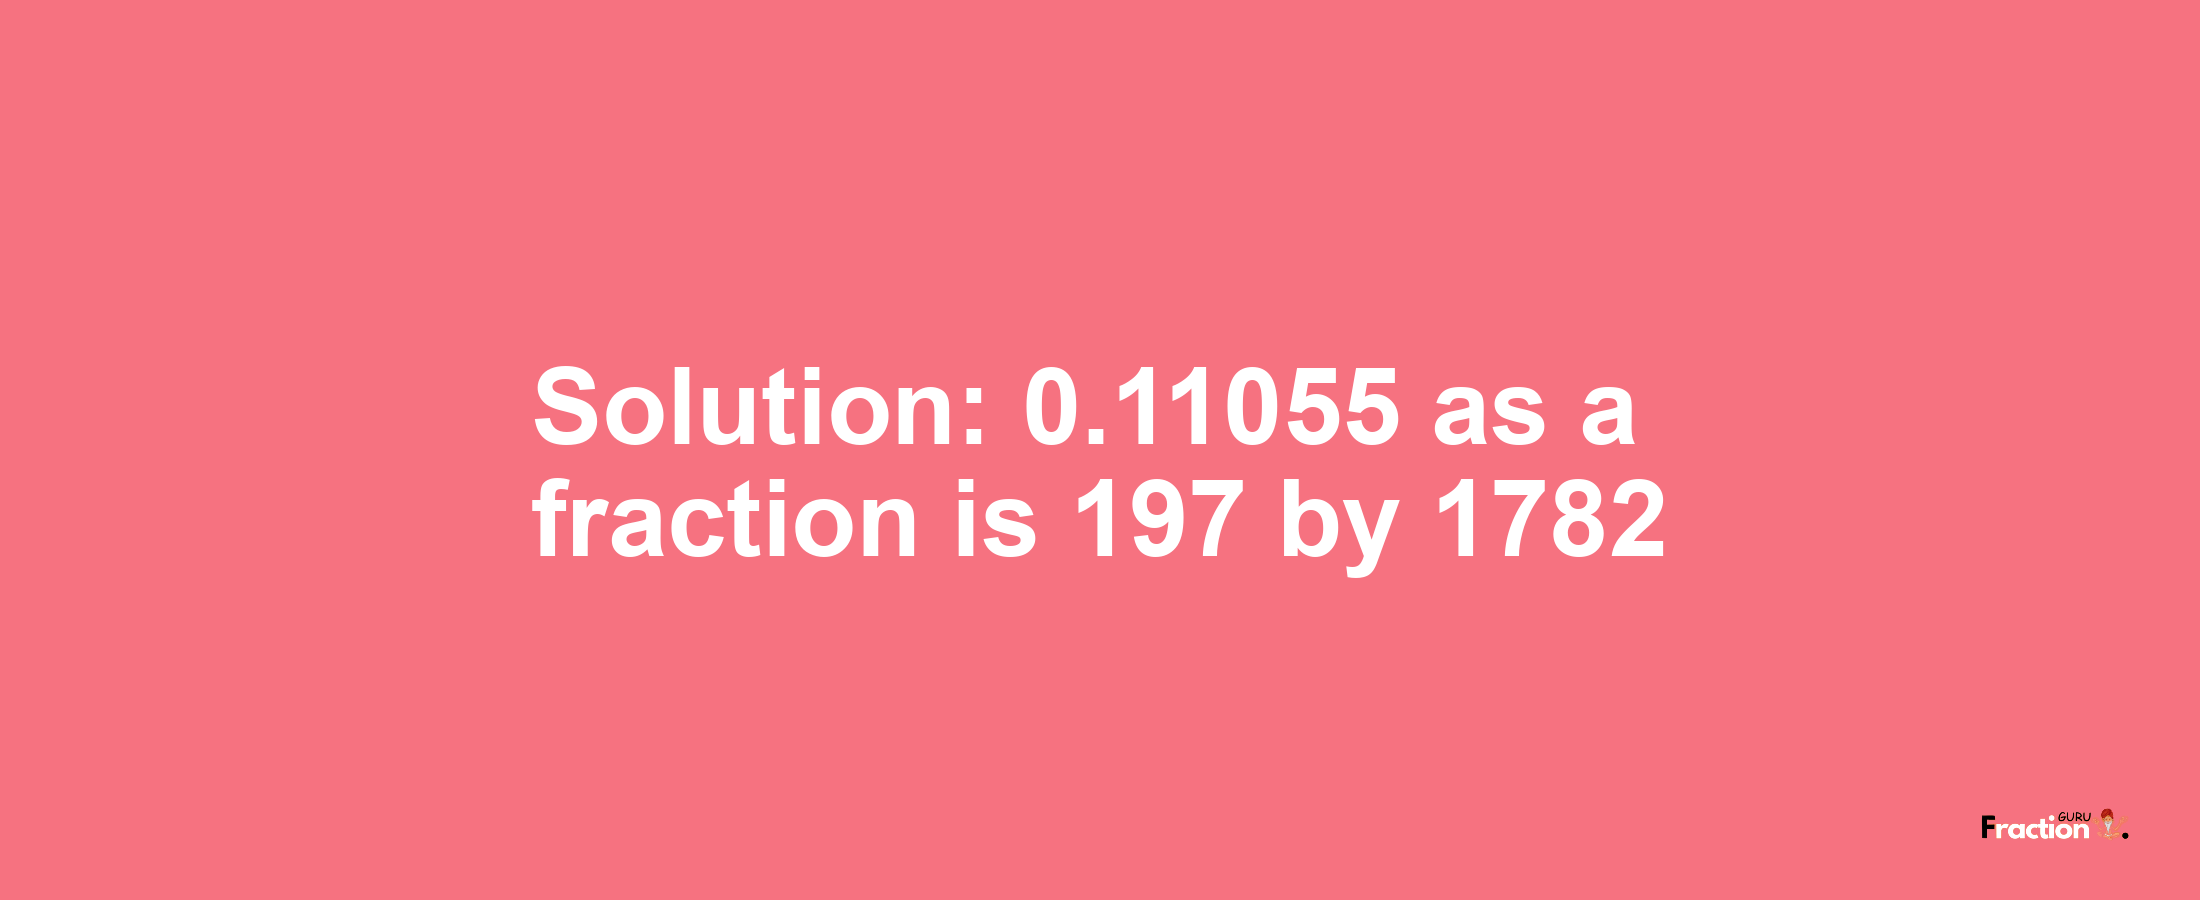 Solution:0.11055 as a fraction is 197/1782